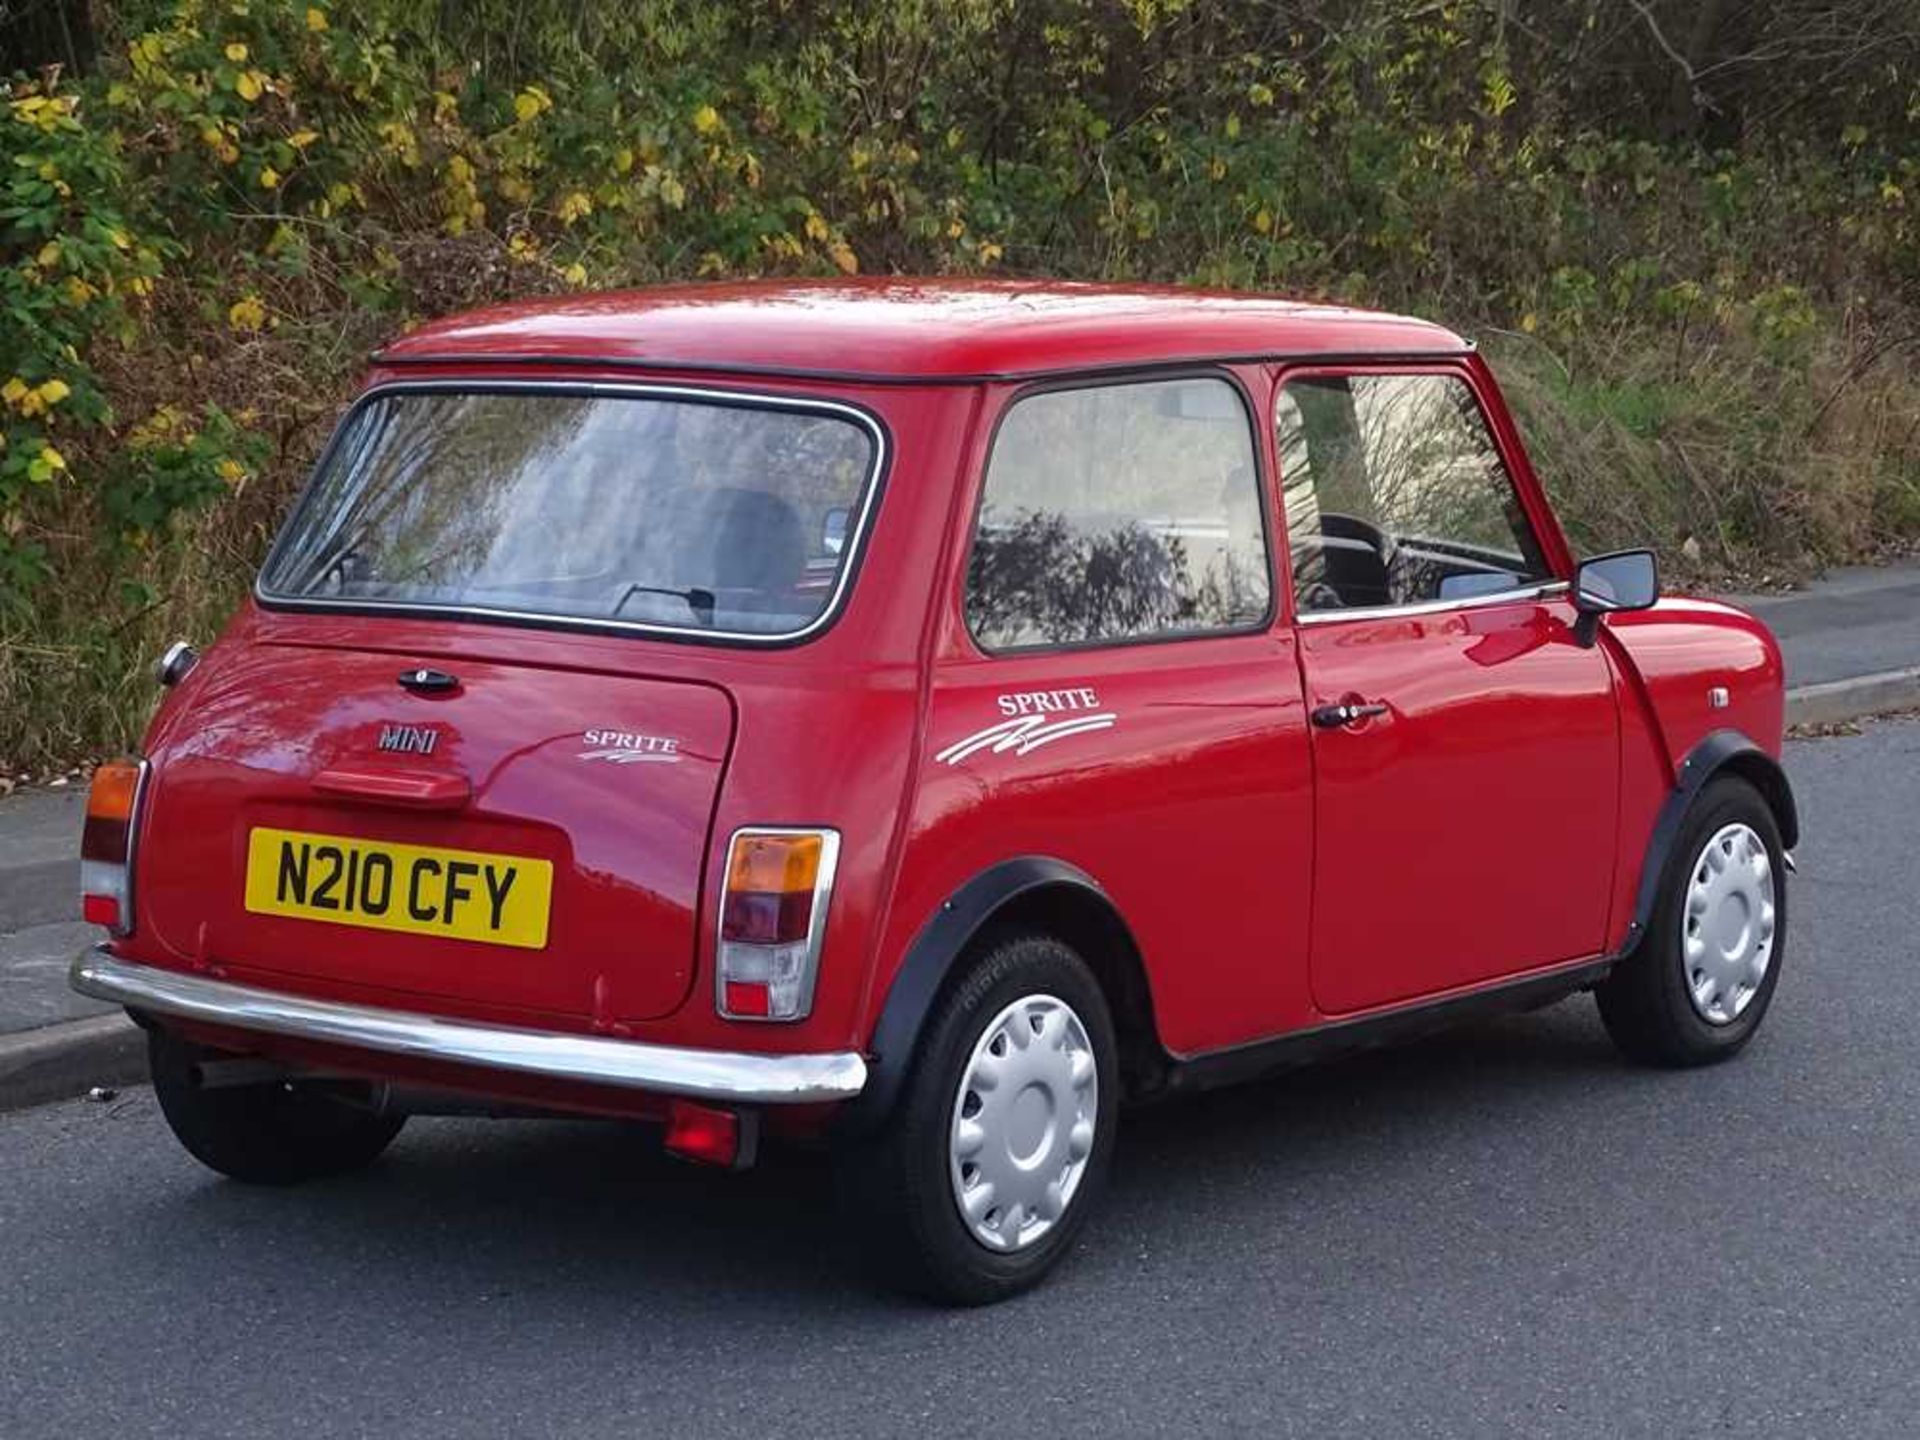 1995 Rover Mini Sprite Only c.22,500 miles from new - Image 11 of 52